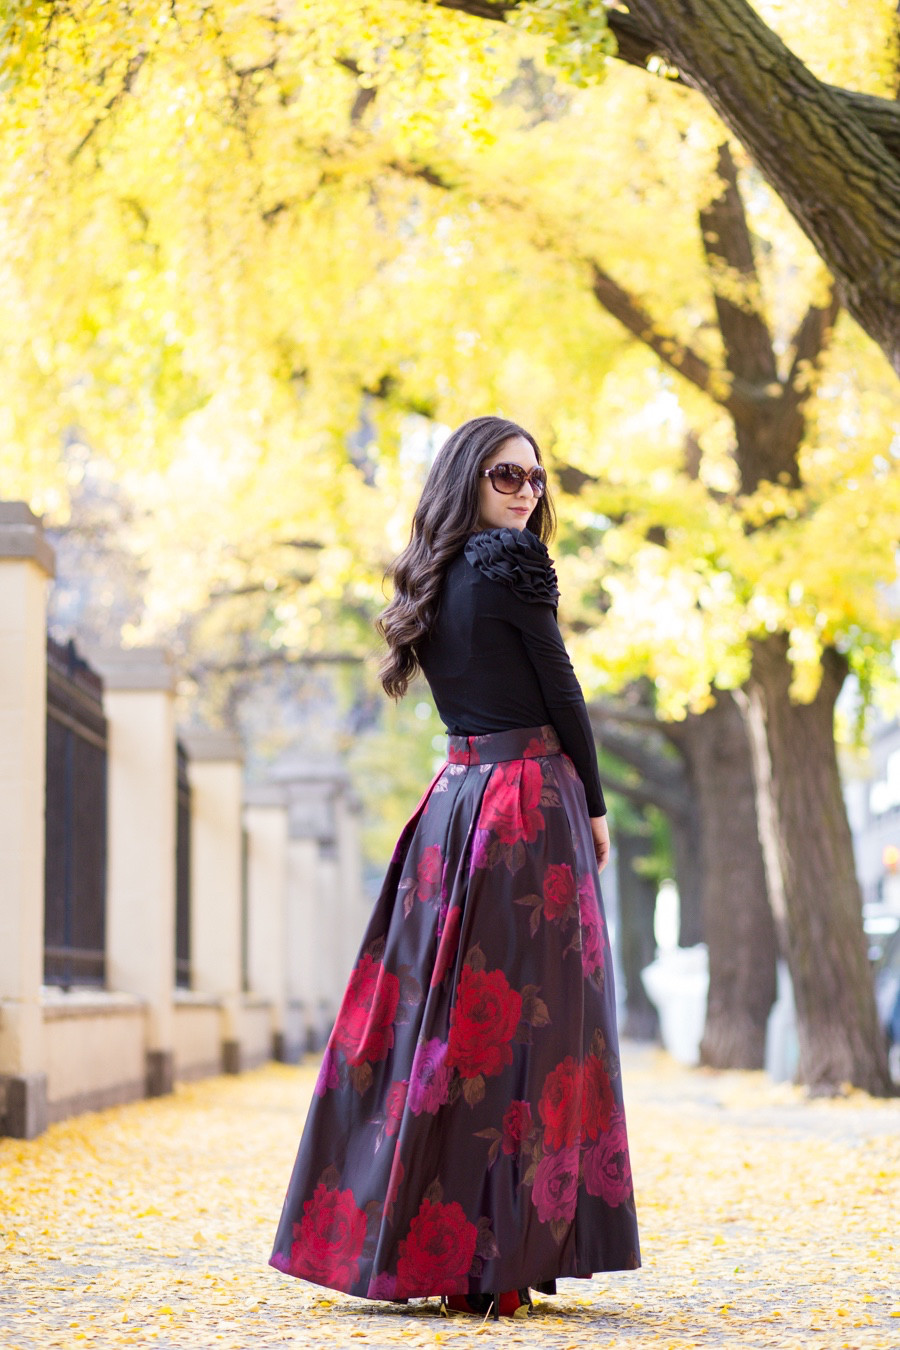 Anthropologie Composition Ball, Composition Ball Skirt, Anthropologie Maxi Skirt, Eliza J Floral Jacquard Maxi, Eliza J Floral Maxi Skirt, Eliza J Holiday Outfit, Holiday 2015, Holiday Outfit ideas, Winter 2015, Tuxe Bodywear, Oracle Bodysuit Tuxe Bodywear, Bradamant, Christian Louboutin Pigalle, Pigalle 120 mm, Pigalle Black Patent Leather Heels